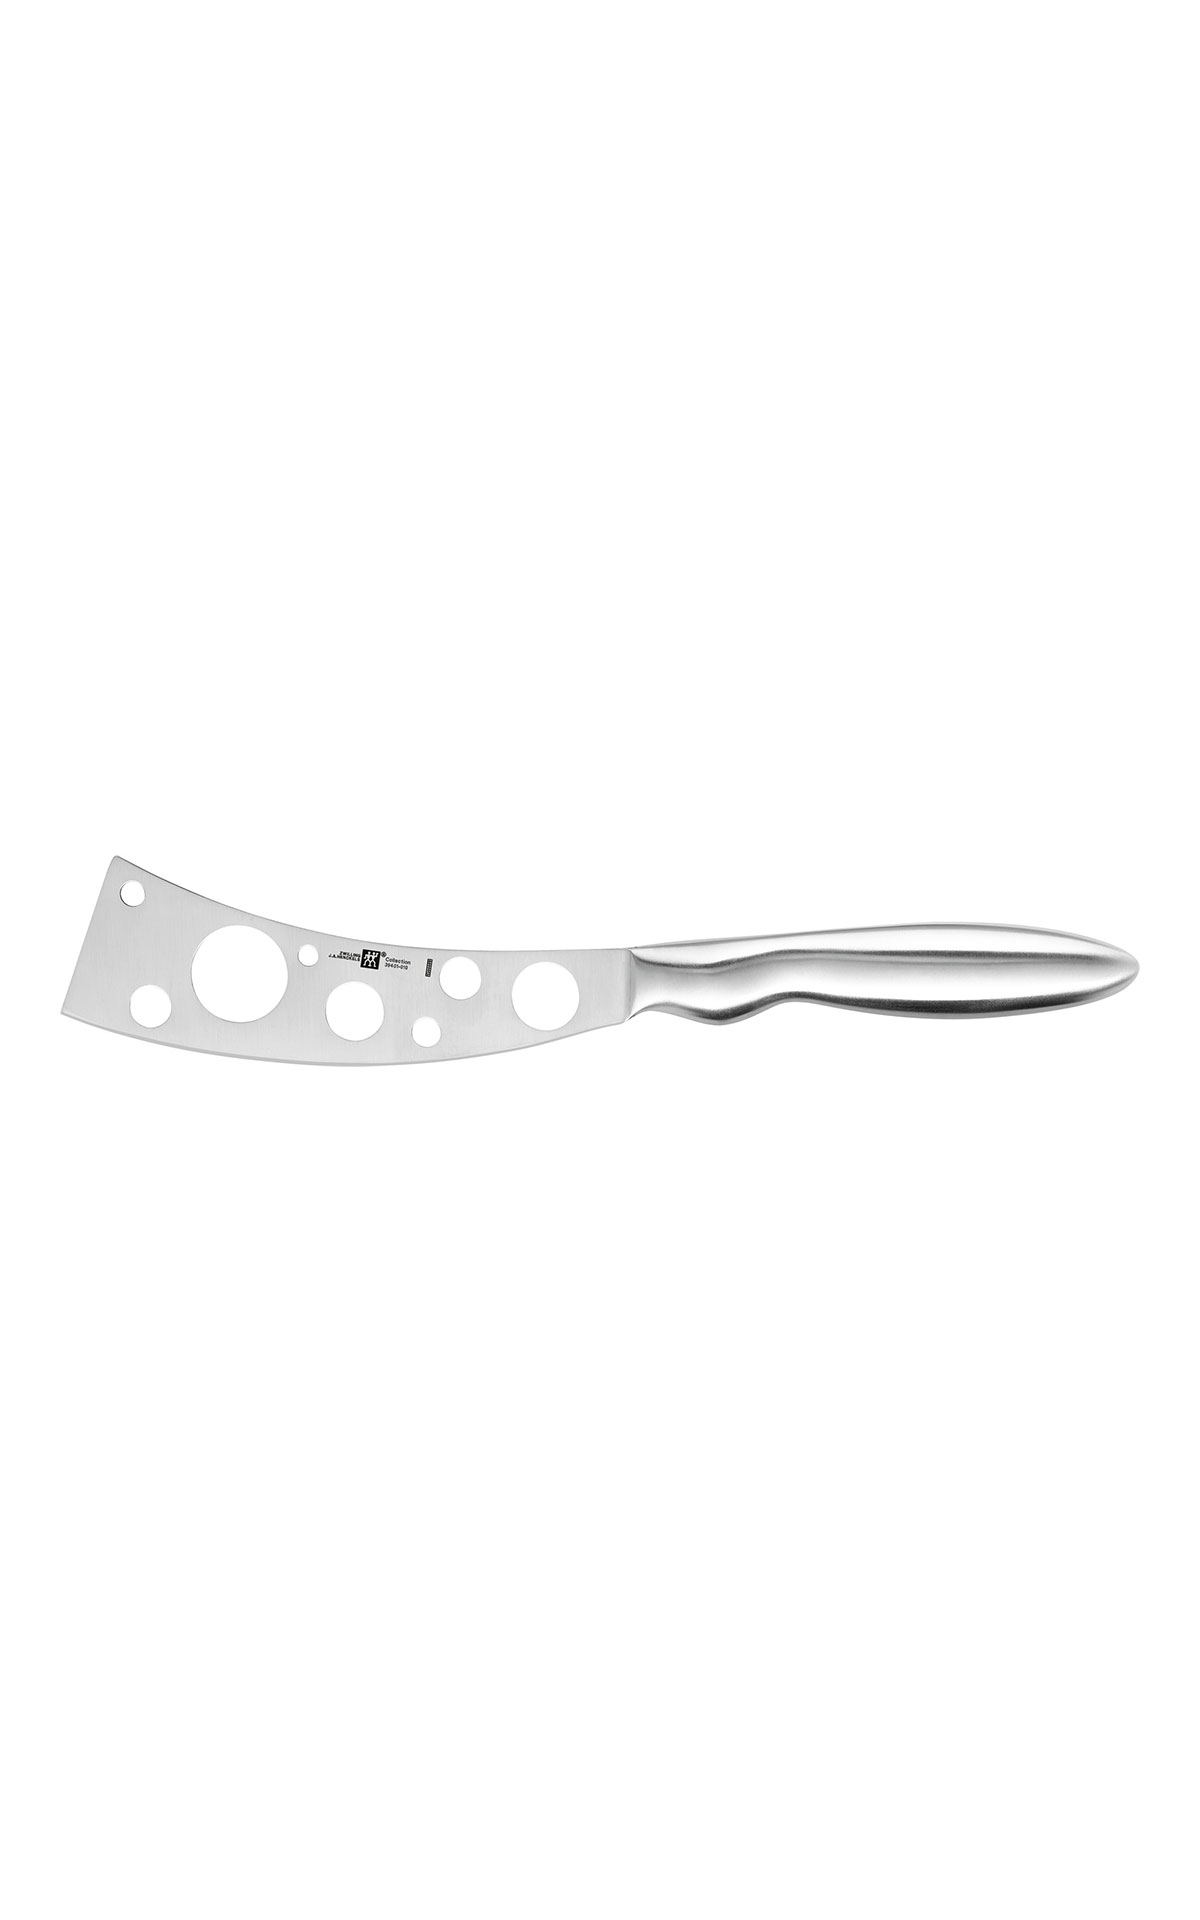 Zwilling Cheese knife from Bicester Village